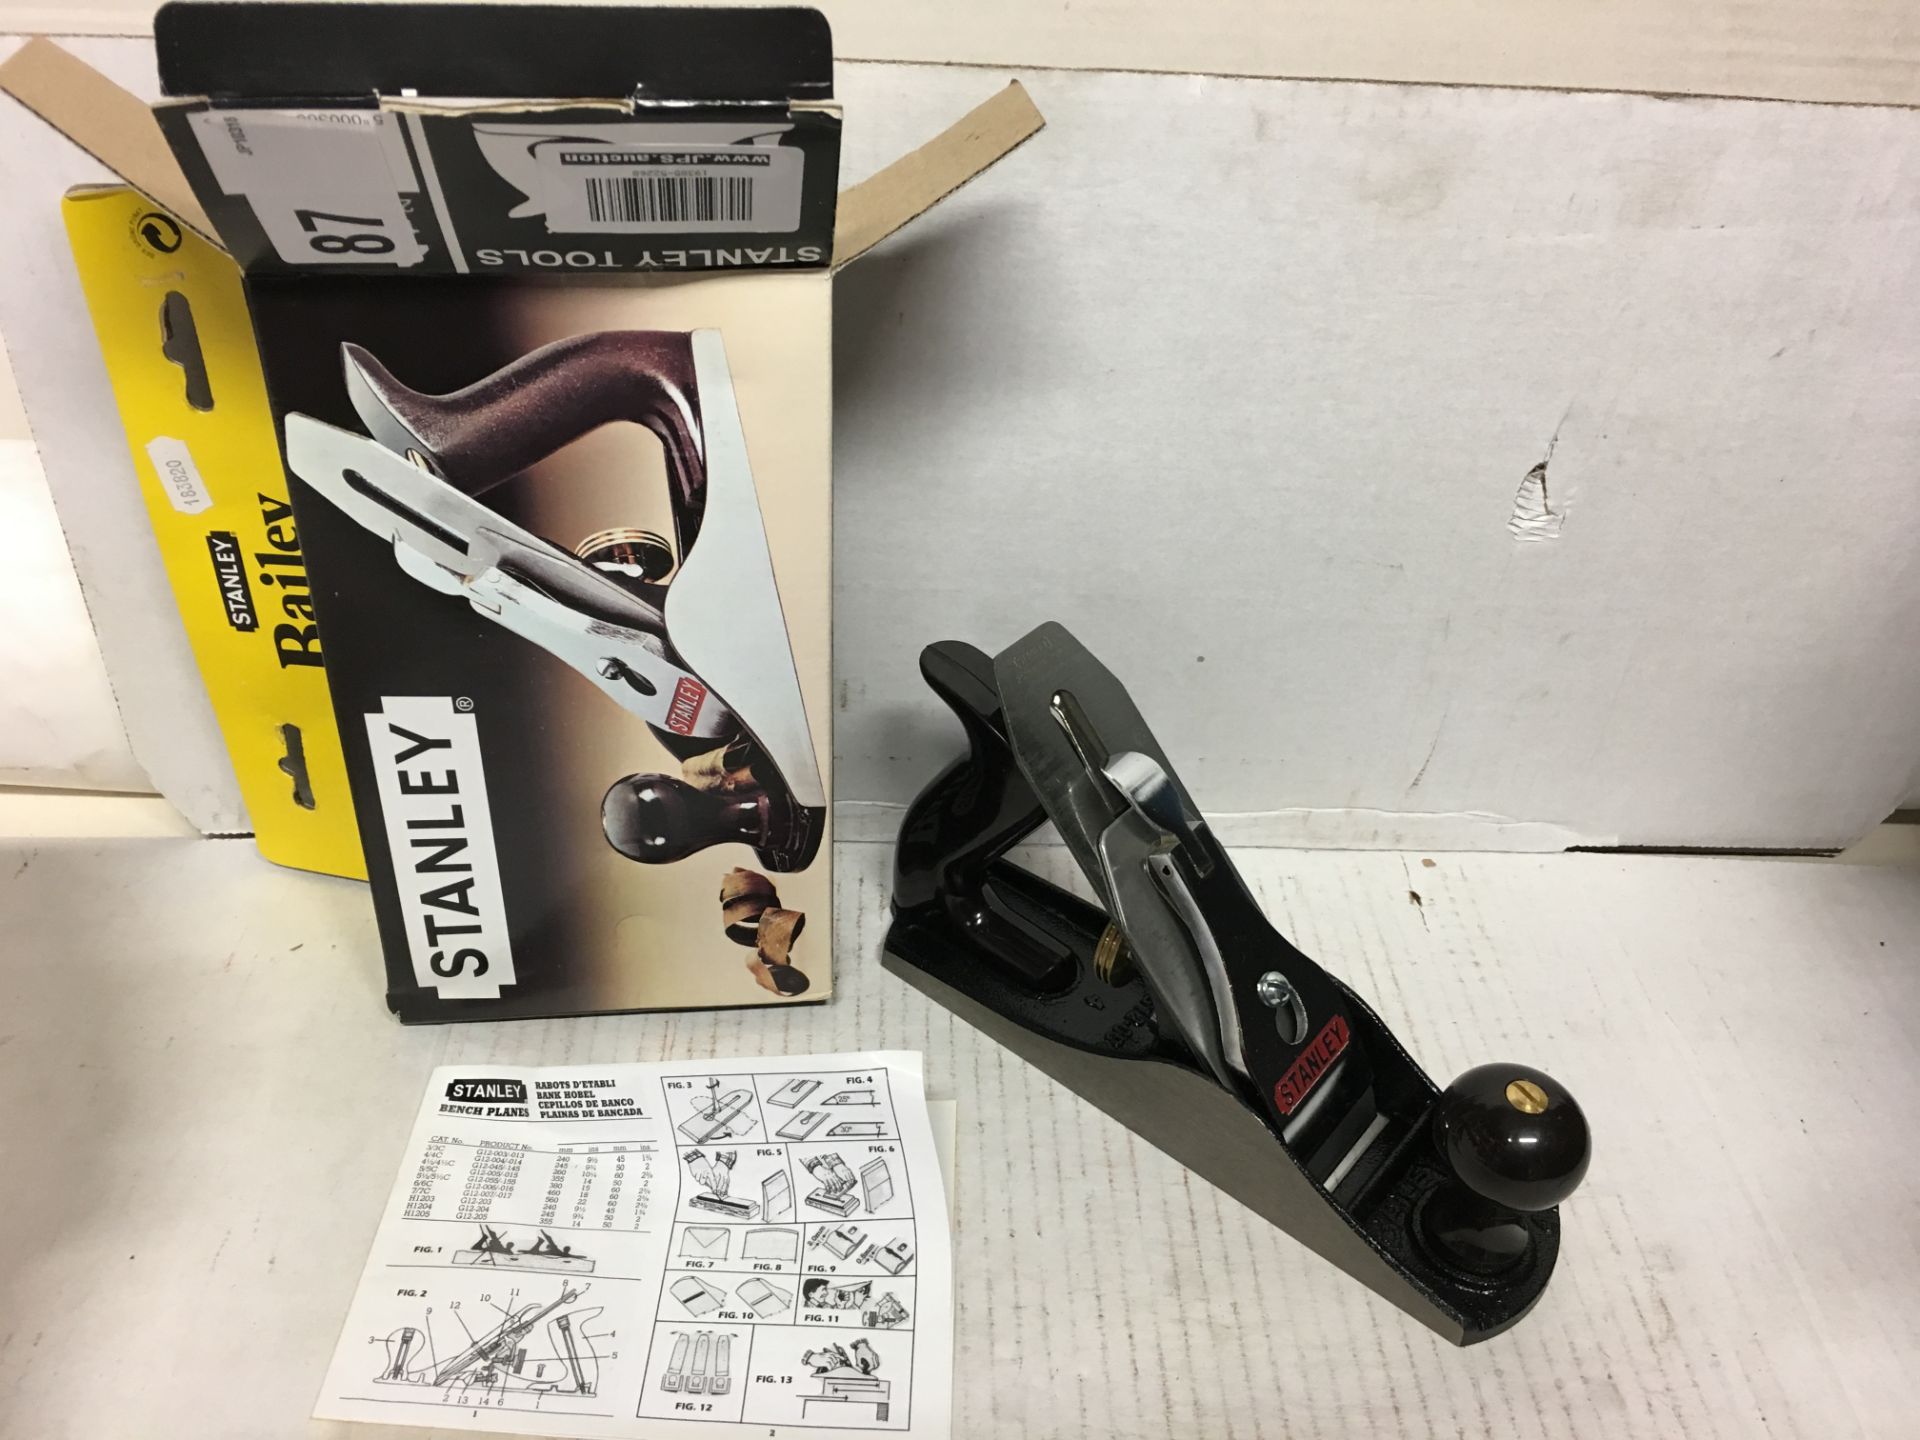 1 x Stanley 4 Smooth Plane 2 Inch 1-12-004 | EAN: 5053440434954 | RRP £57.36 - Image 3 of 3